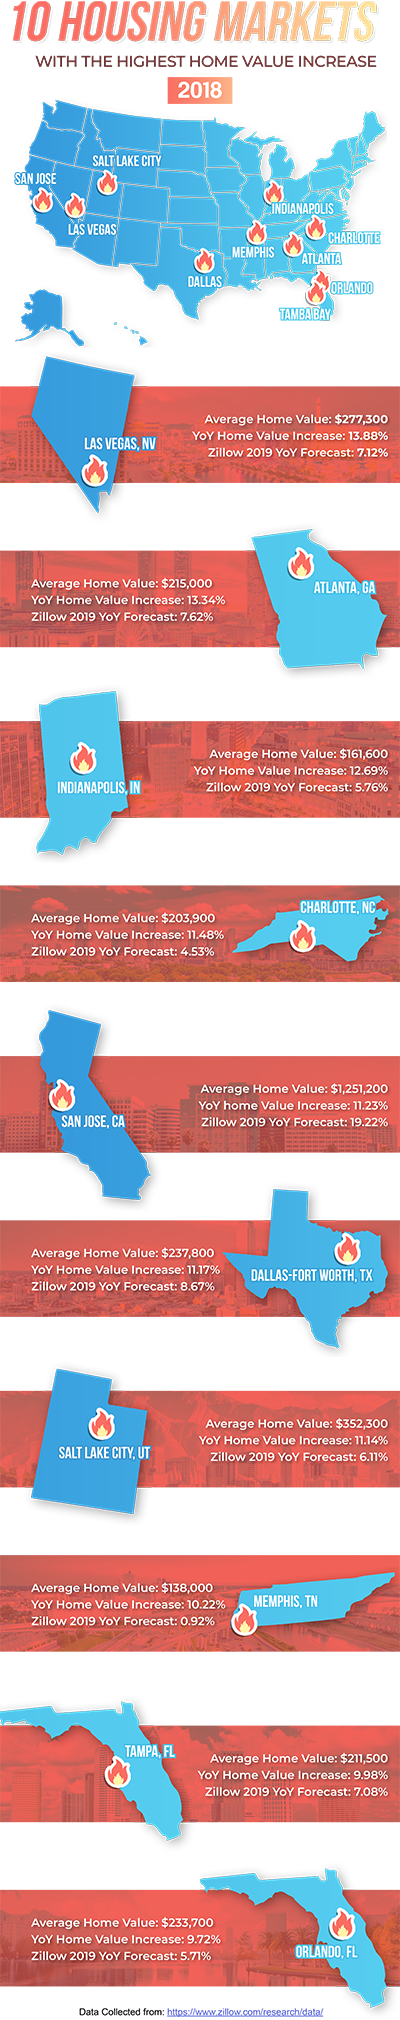 2018’s Fastest-Growing Housing Markets